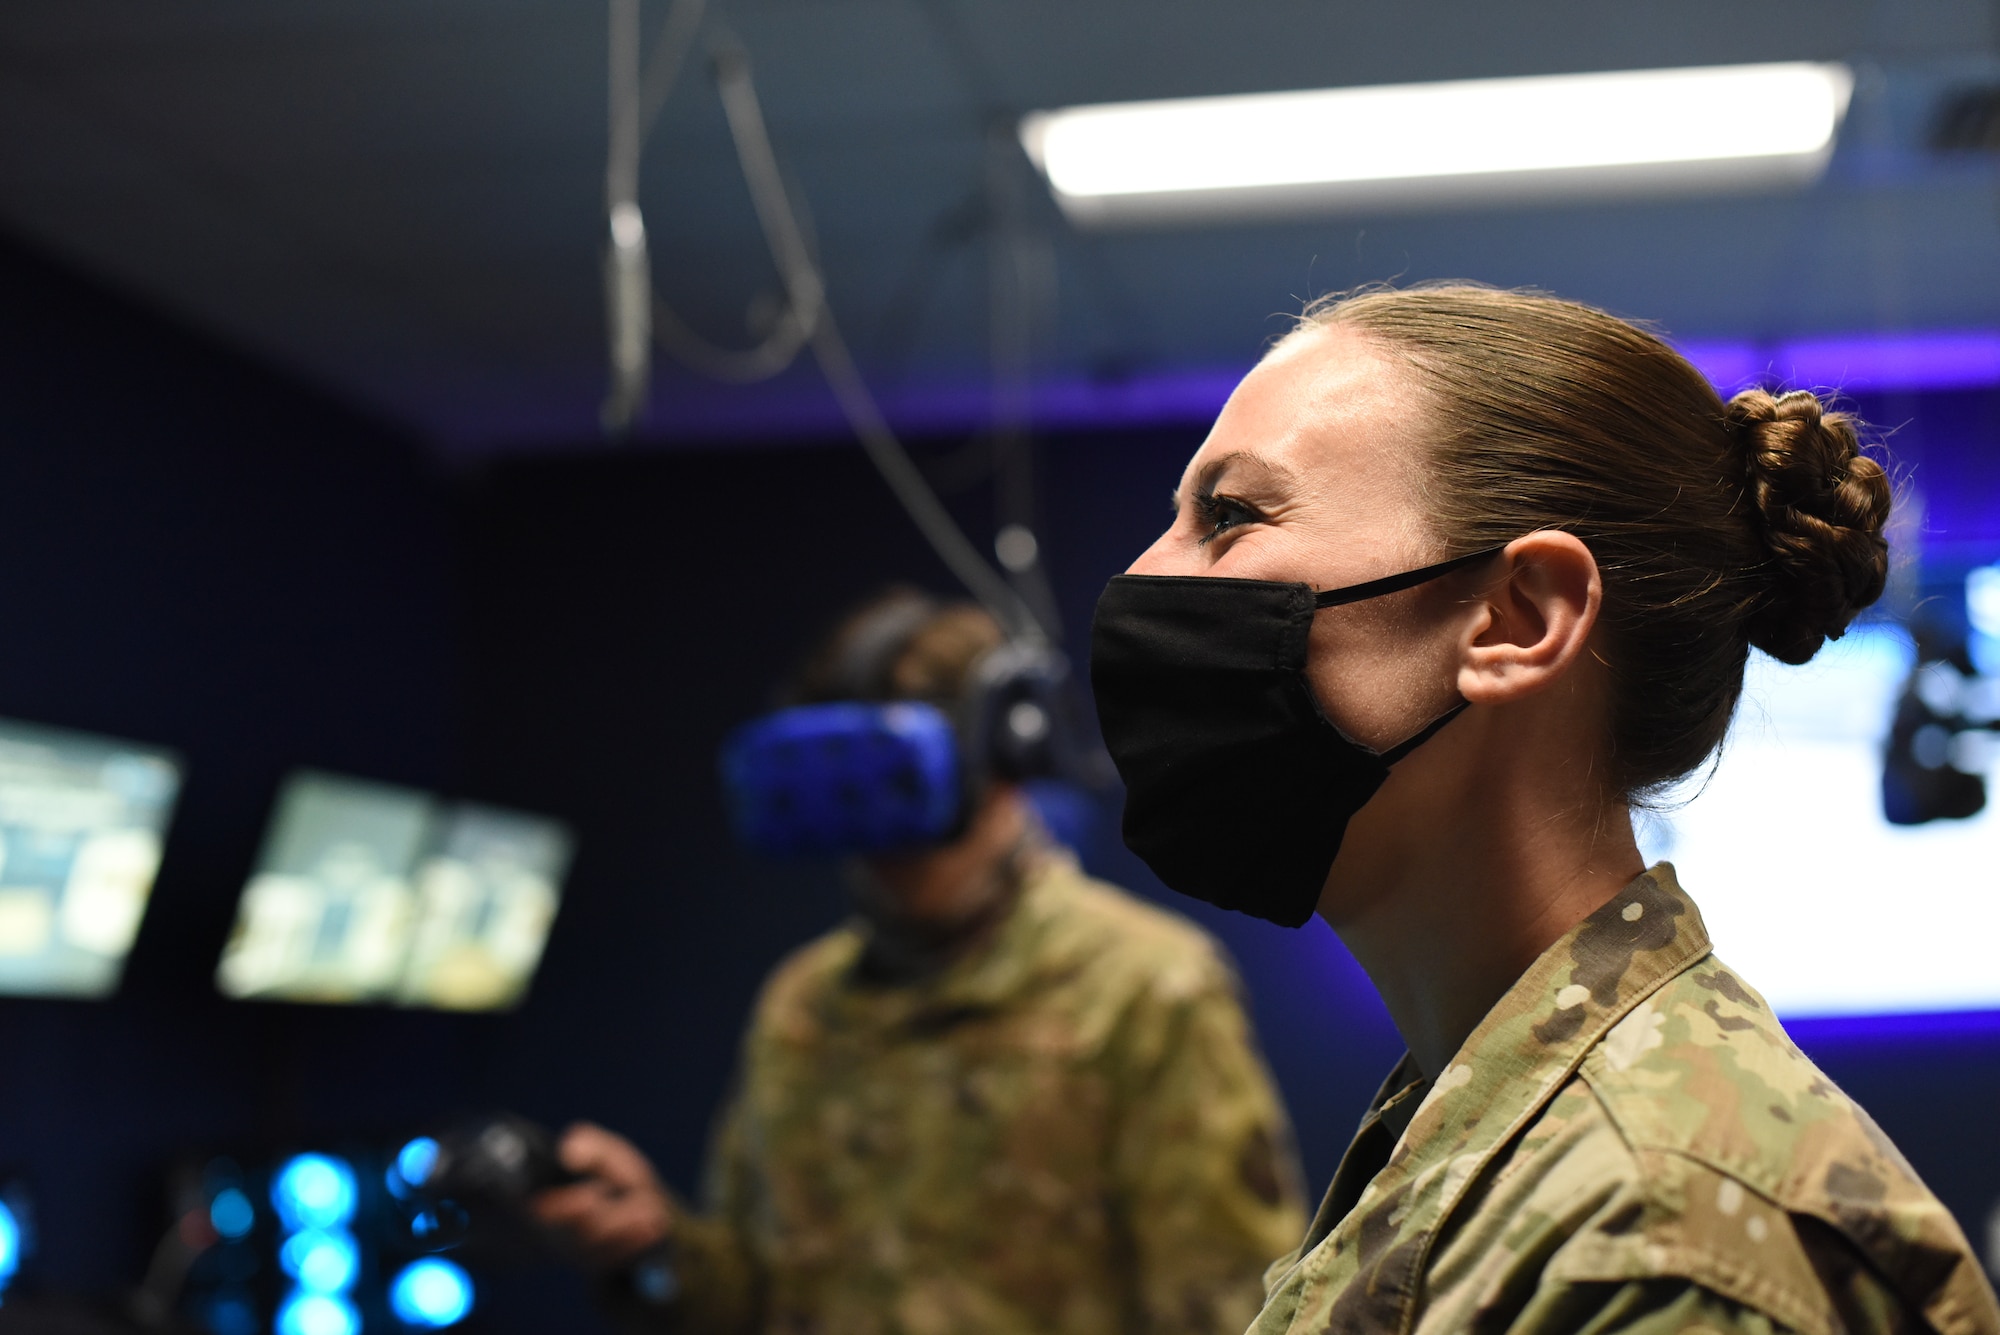 C-130 maintenance instructor watches student's virtual reality training session